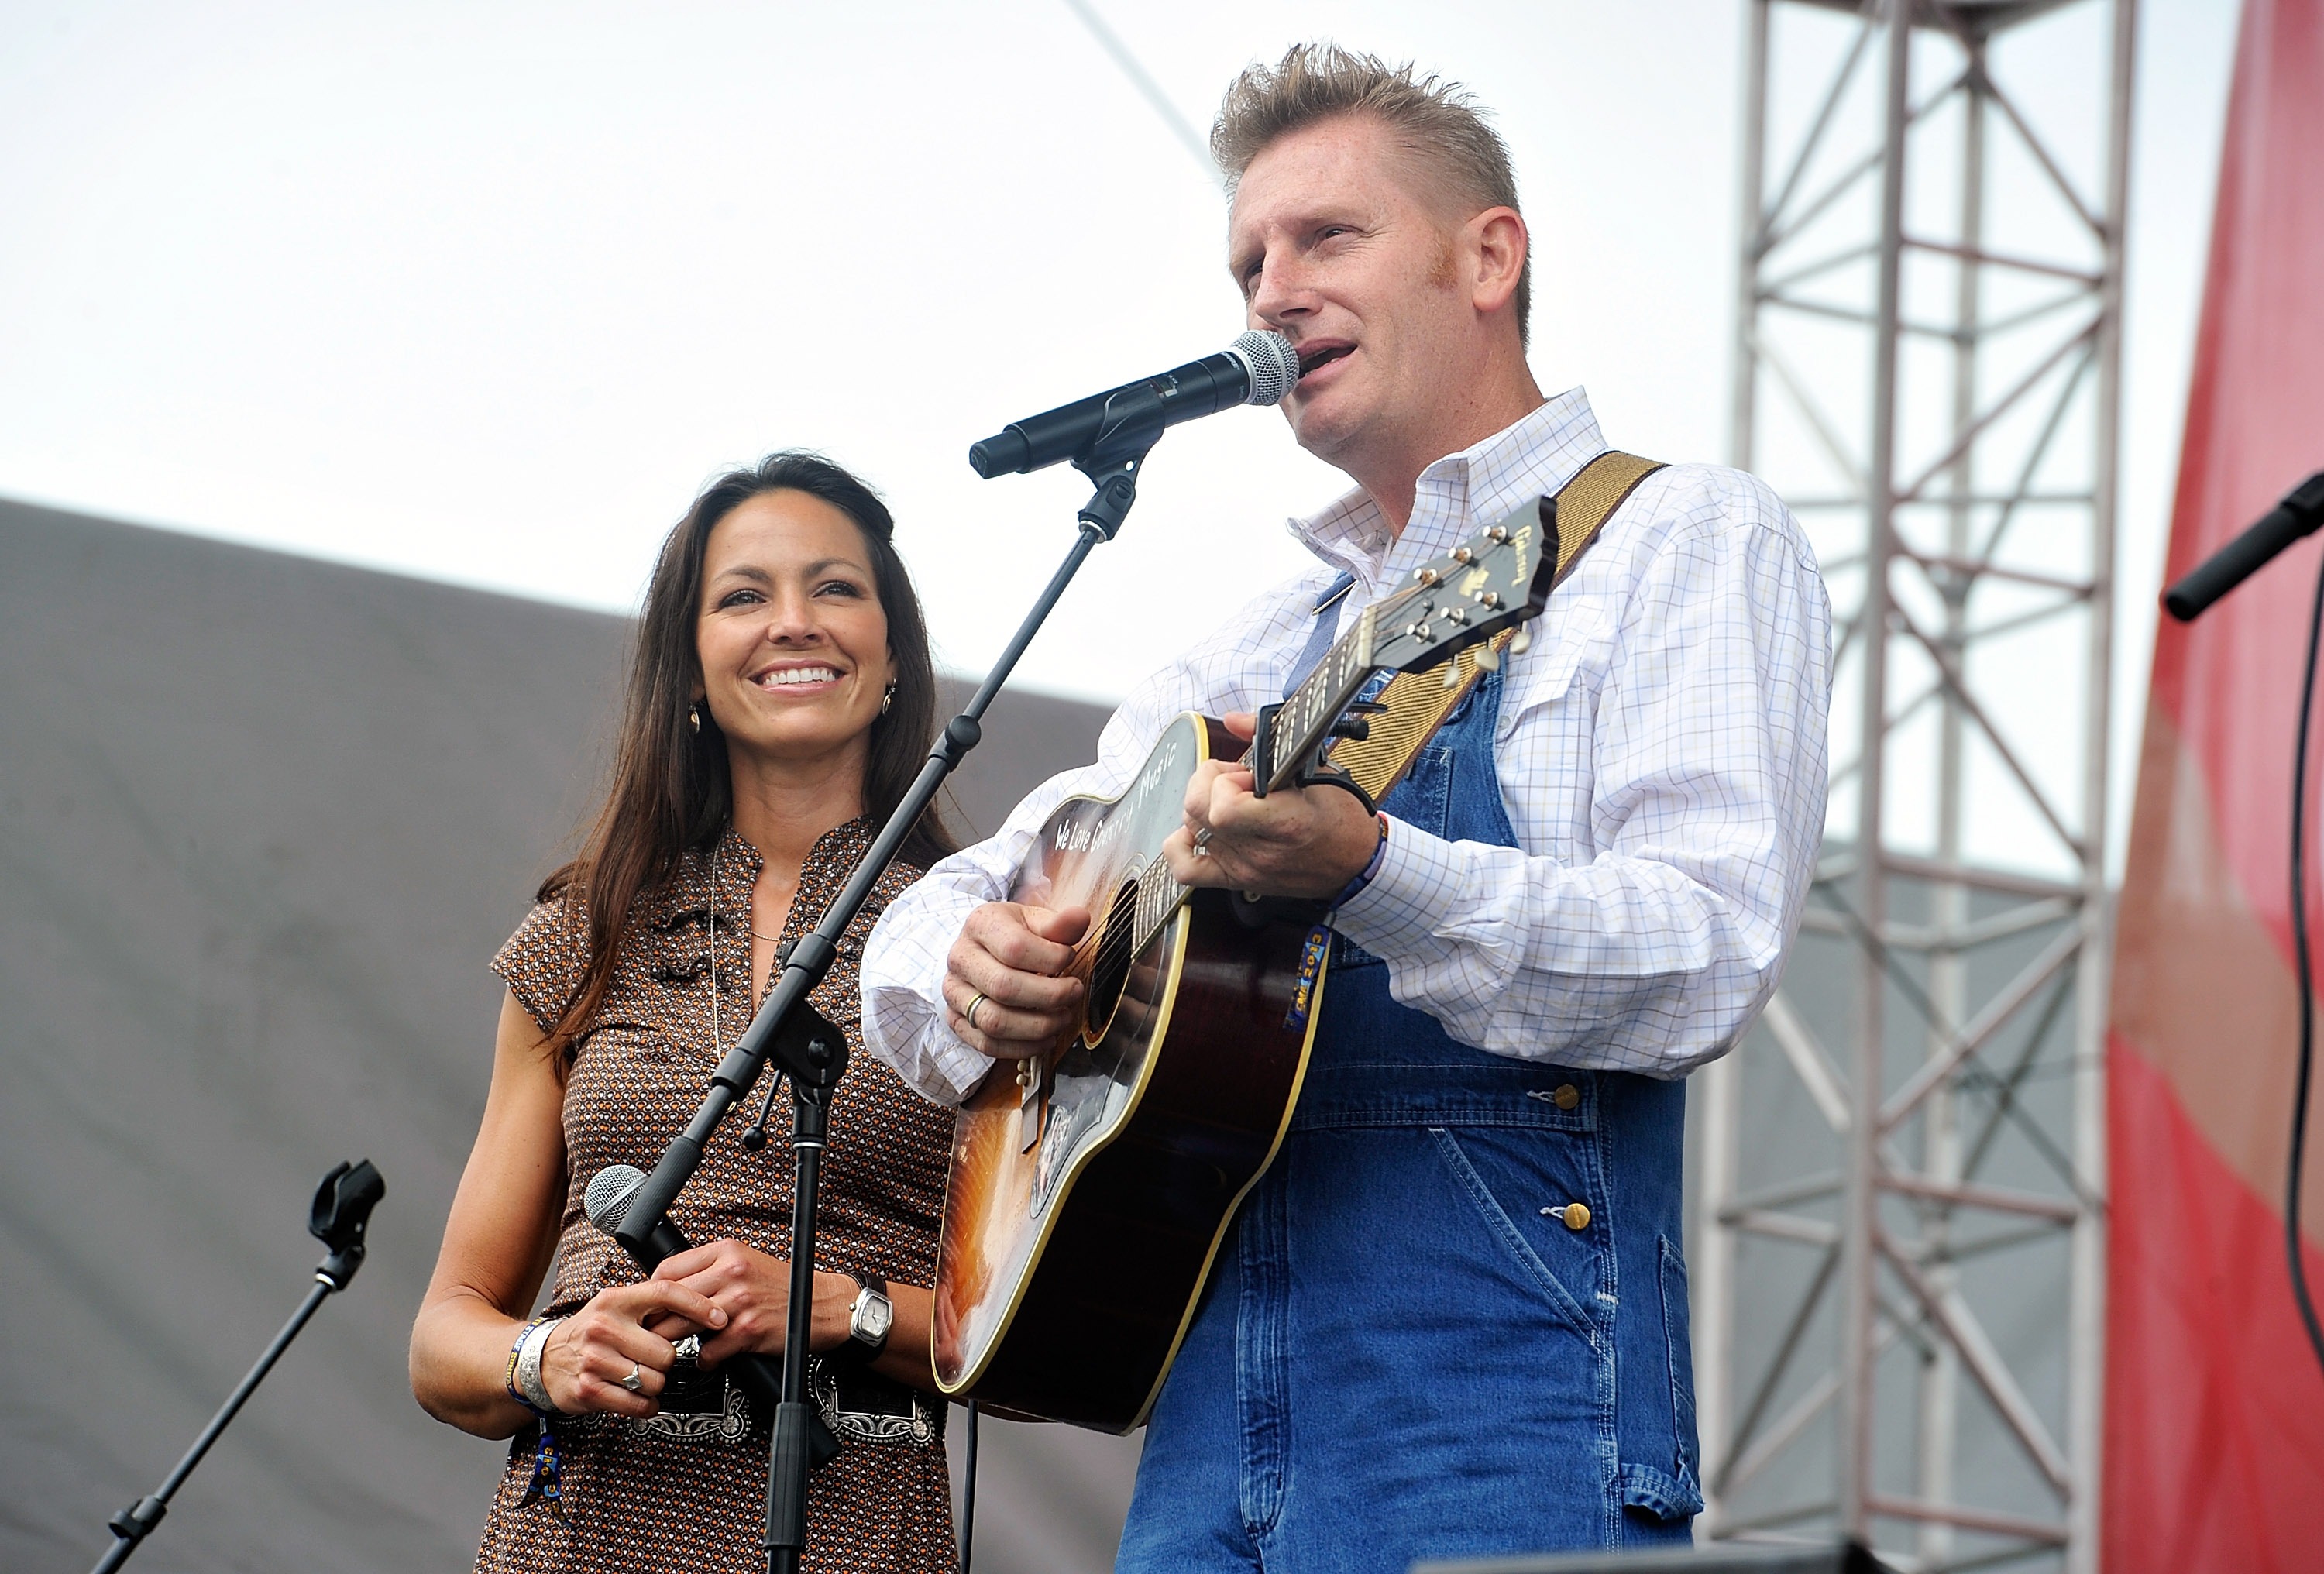 Rory Feek and Joey Feek during the 2013 CMA Music Festival on June 9, 2013, in Nashville, Tennessee. | Source: Getty Images